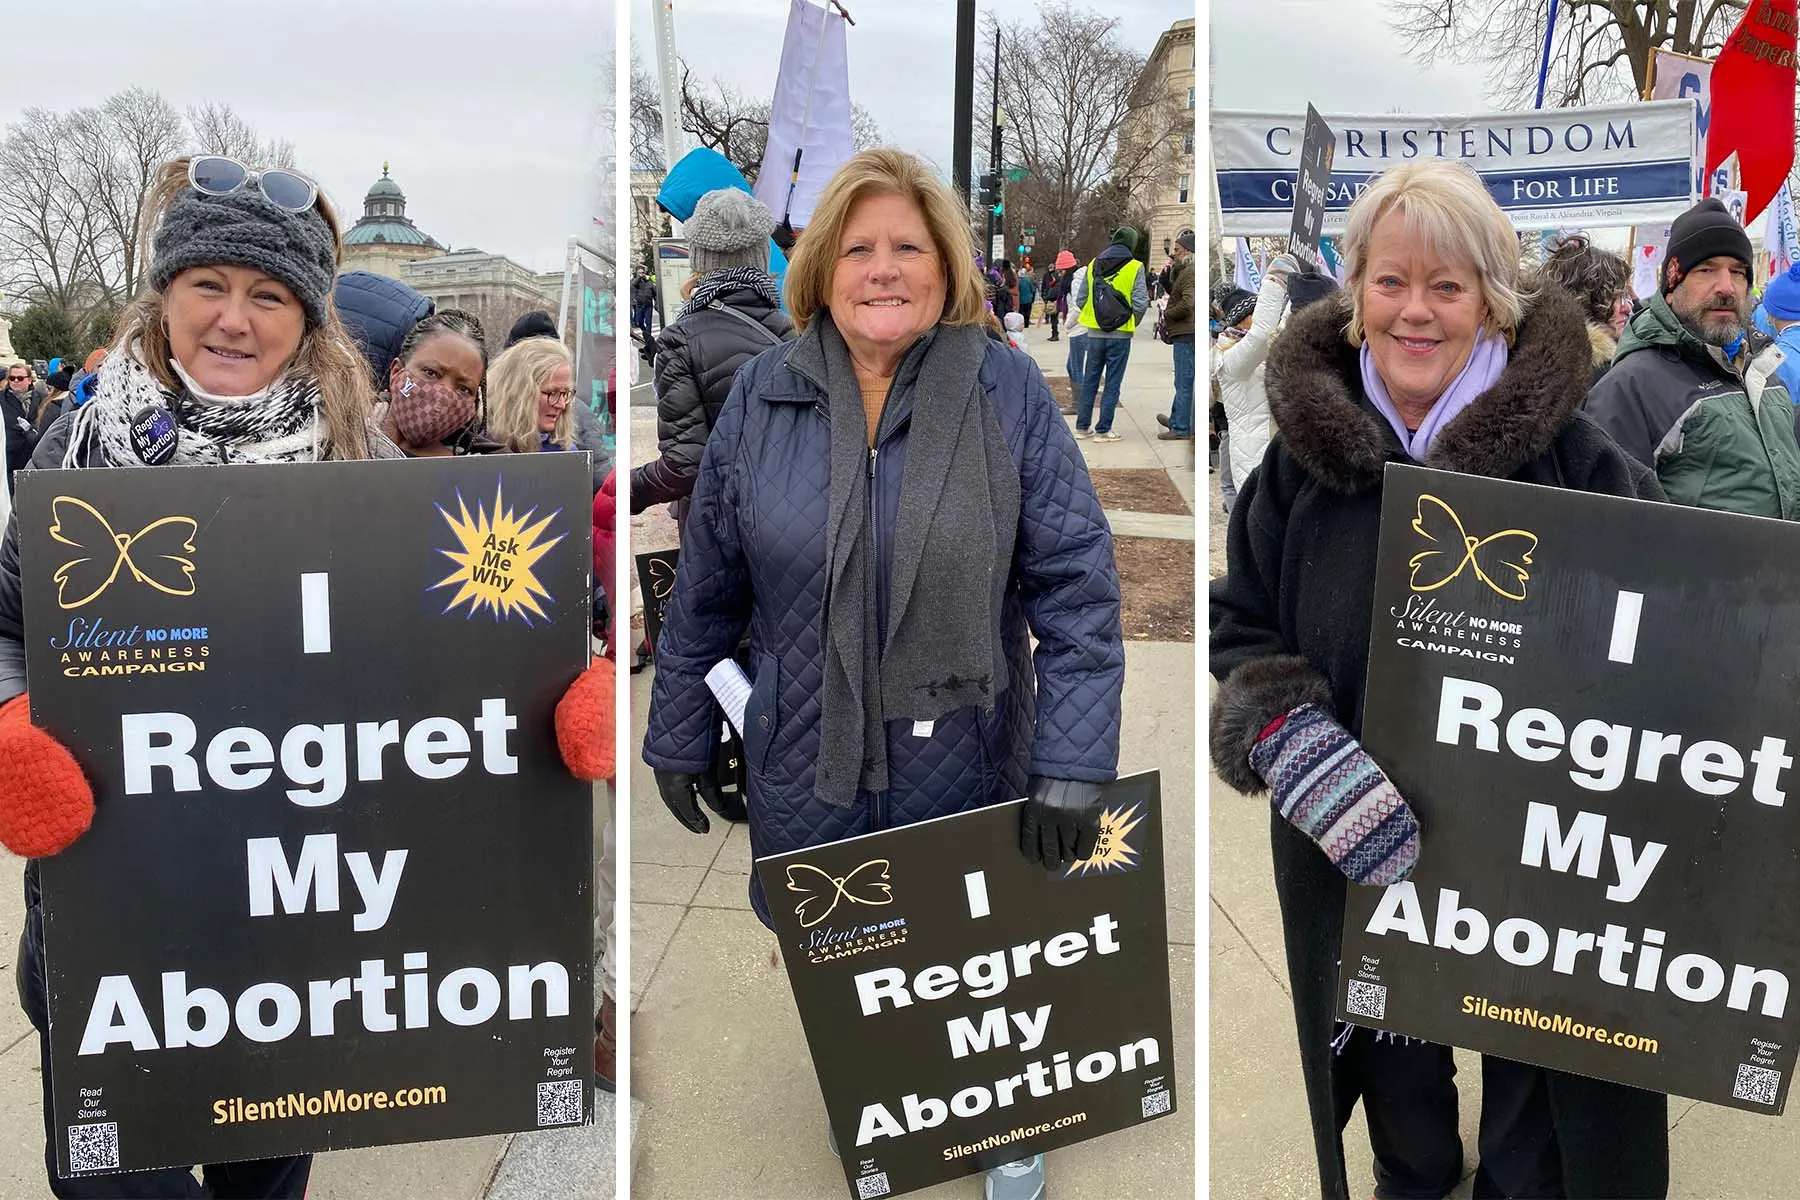 Three women at the 2022 March for Life who have struggled to cope with their decisions to have abortions shared their experiences with CNA. They are (left to right): Shelley, who declined to provide her full name; Jody Duffy, and Leslie Blackwell.?w=200&h=150